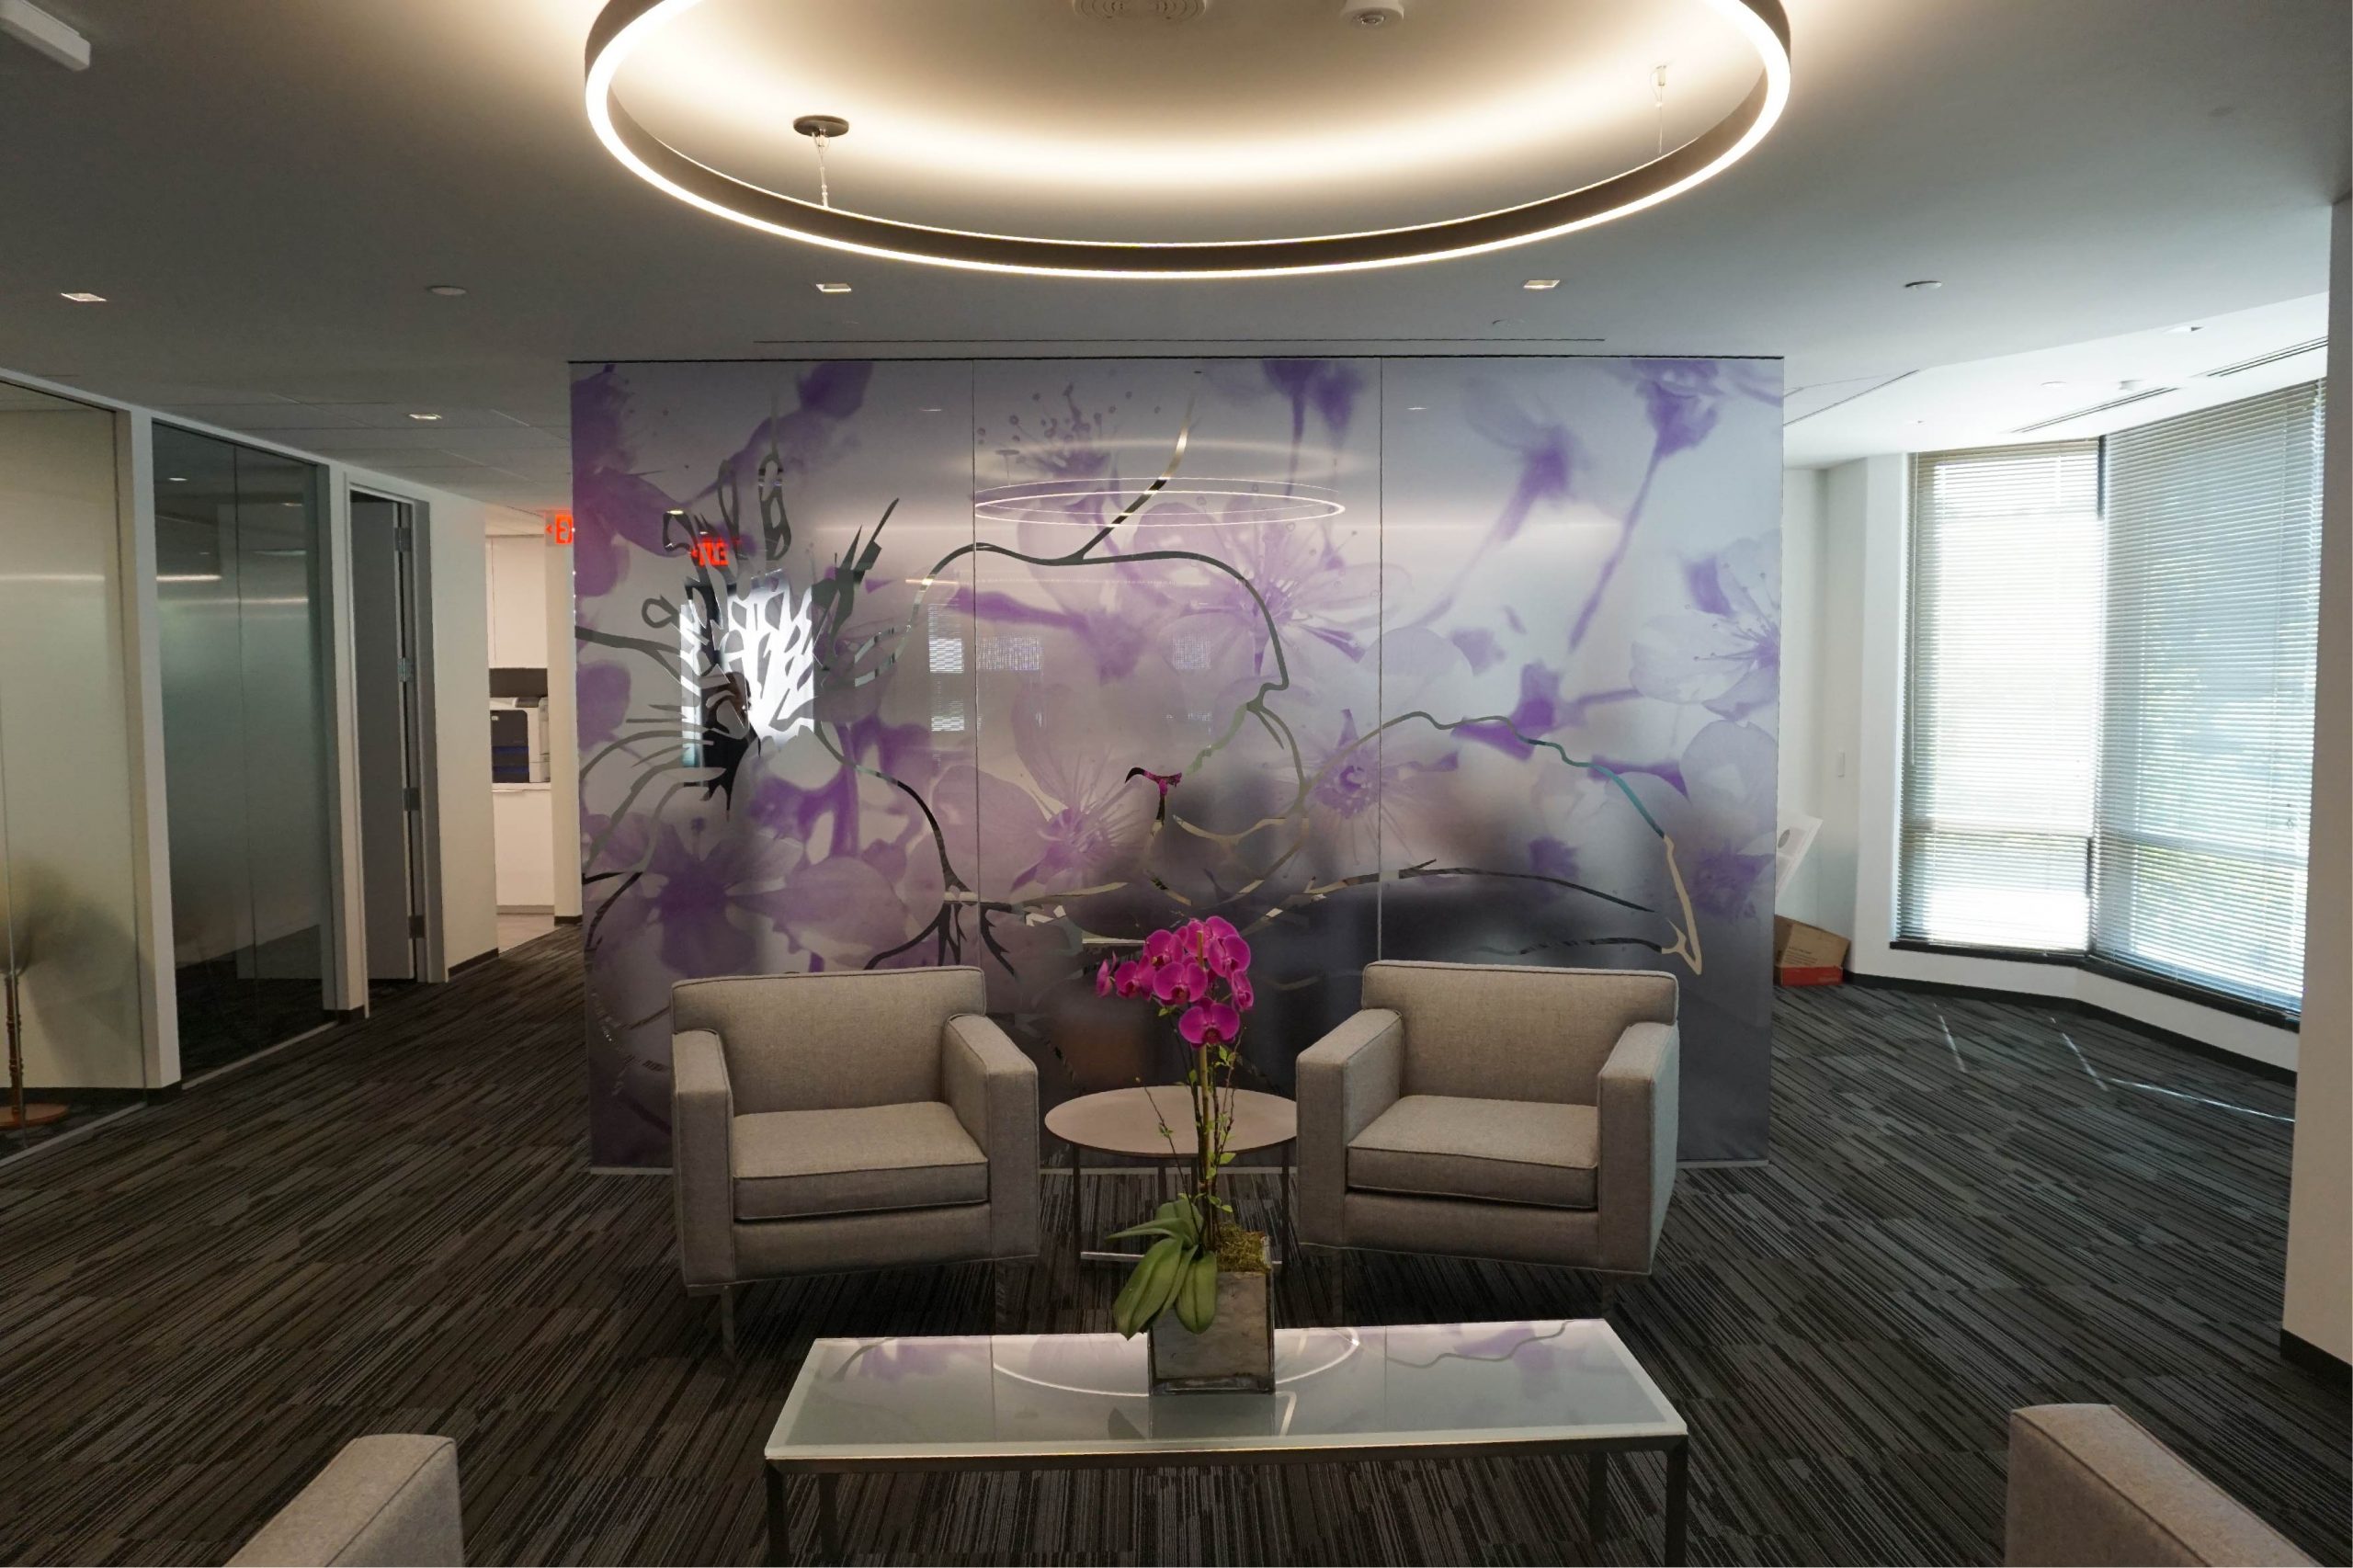 3m science for life office lounge with beige chairs, circular light, and purple commercial graphic decorative film in flower pattern